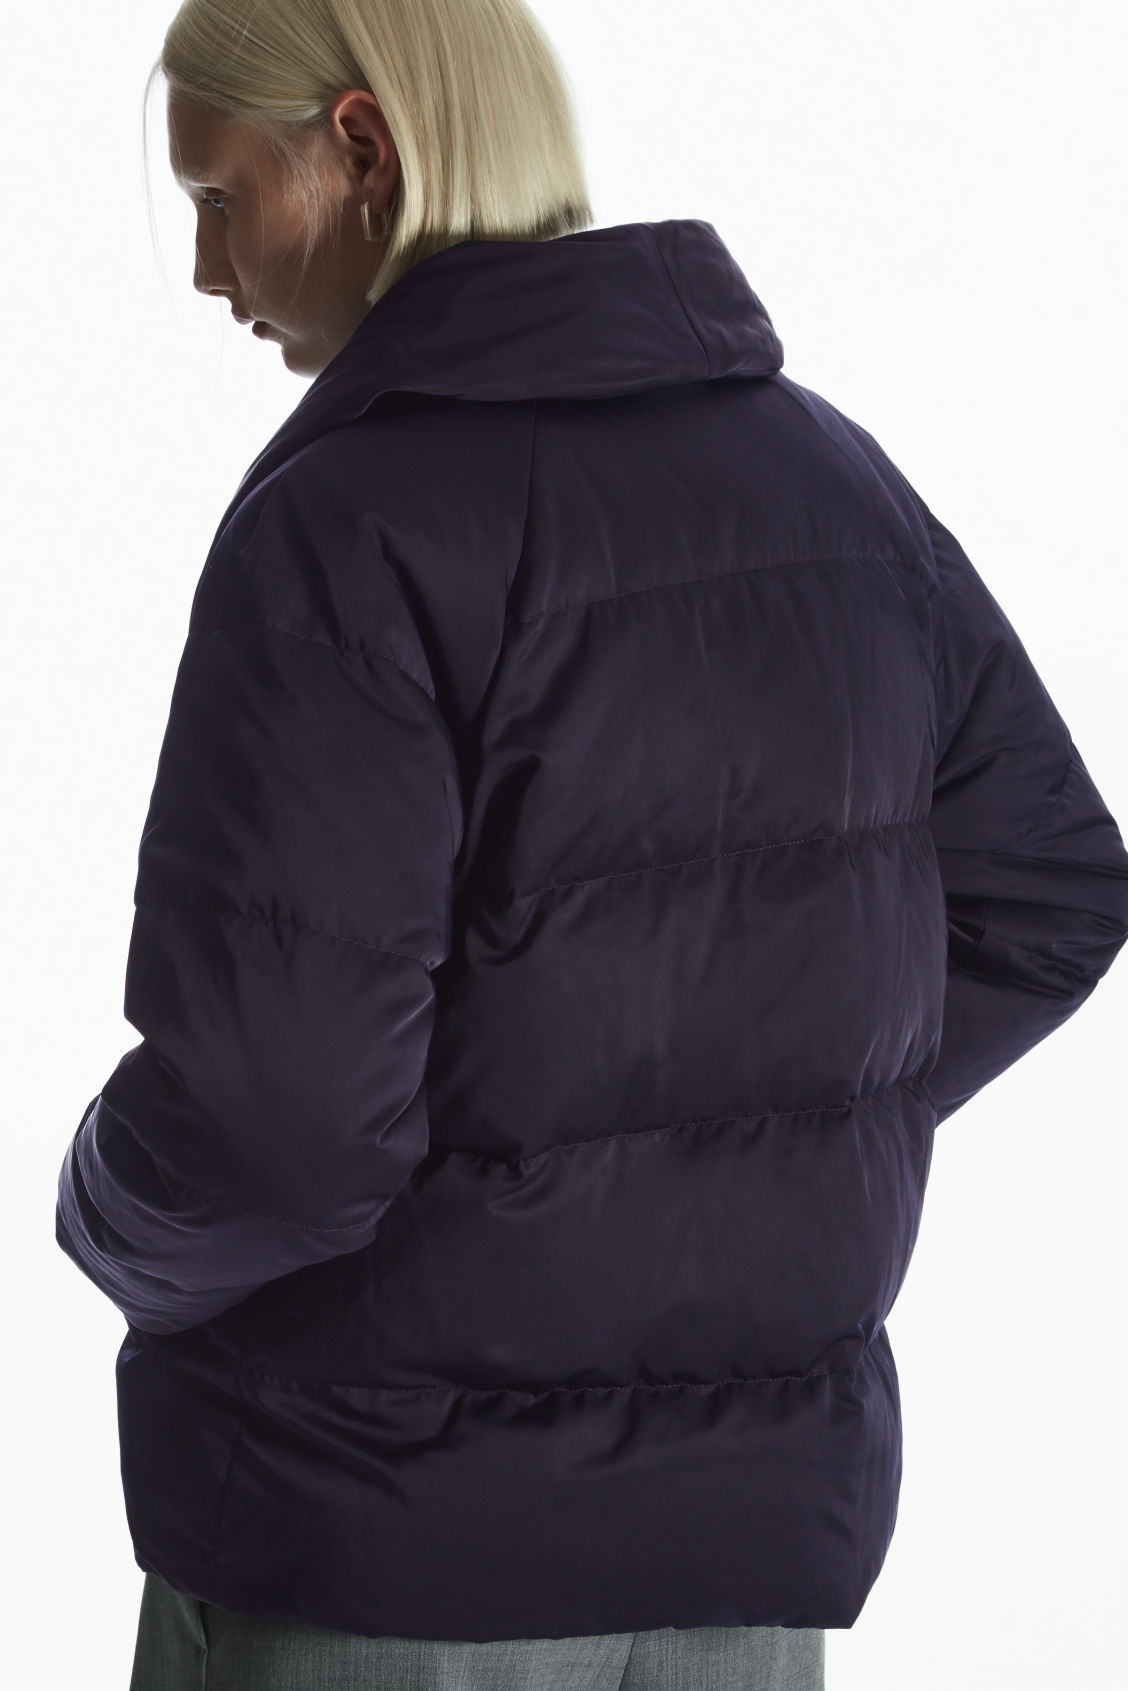 COS Featured SHAWL-COLLAR PUFFER JACKET sale at coswomens.com | Free ...